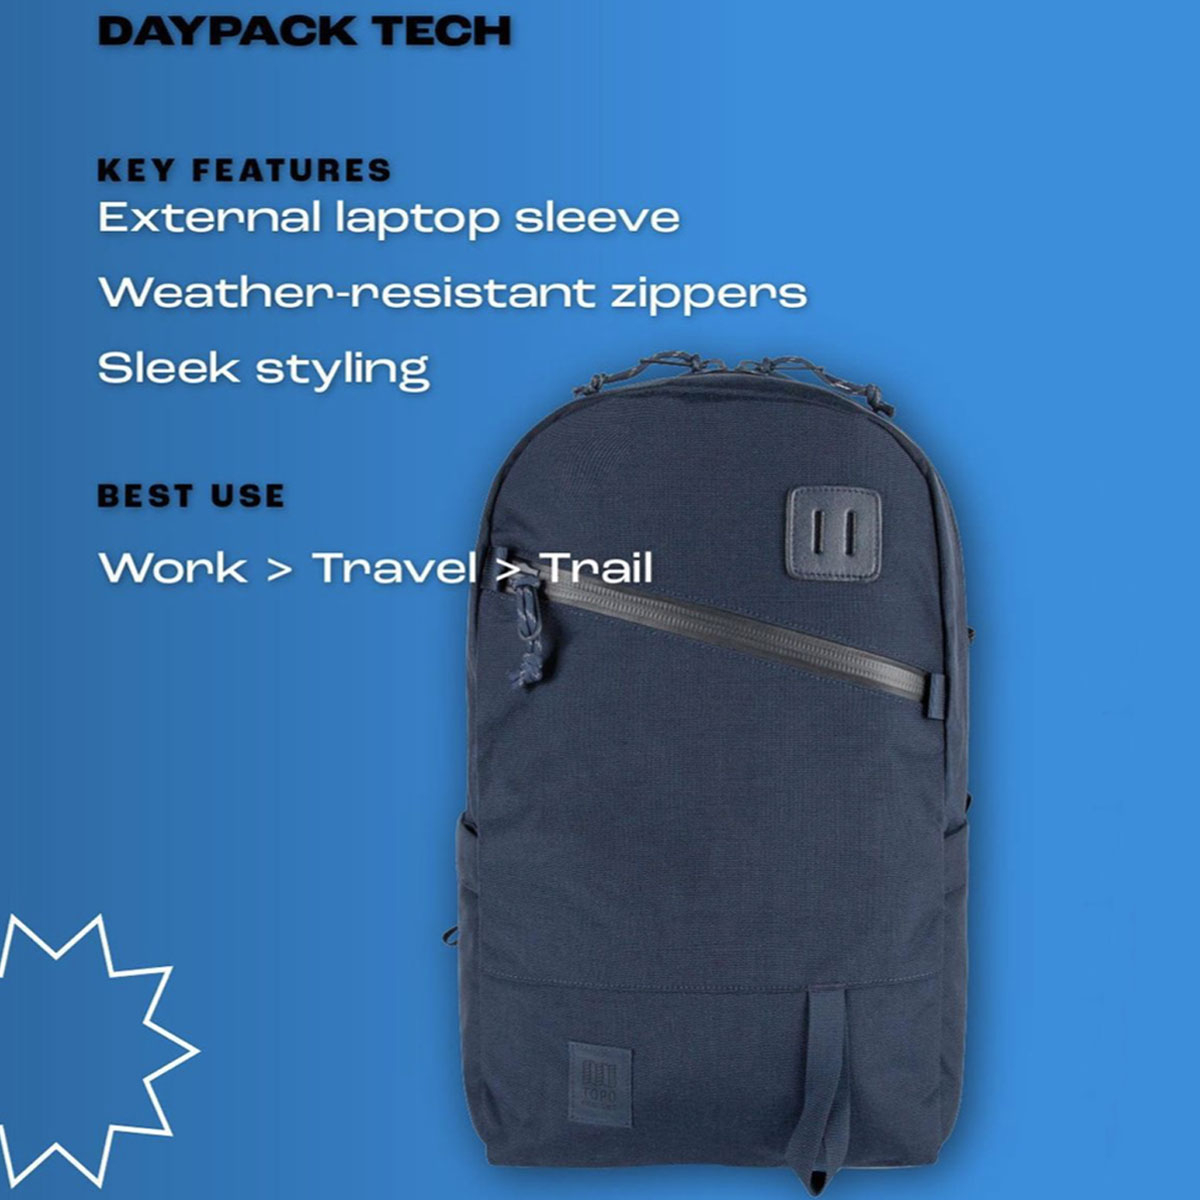 Topo Designs Daypack Tech, Water Repelent Finish, Laptop Sleeve, Travel Friendly